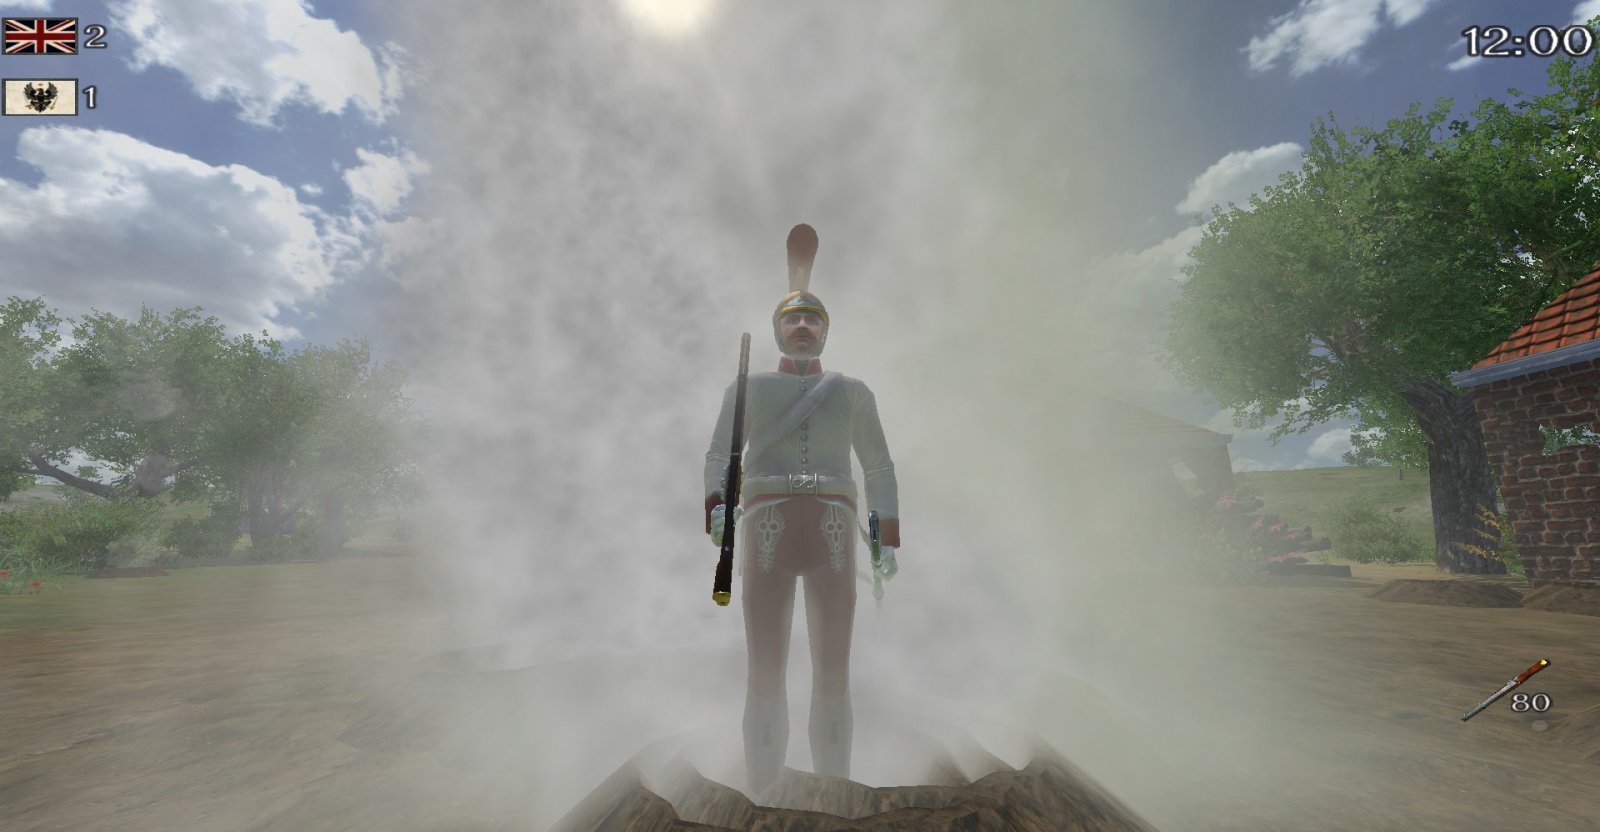 An Admin emerging from the smoke.